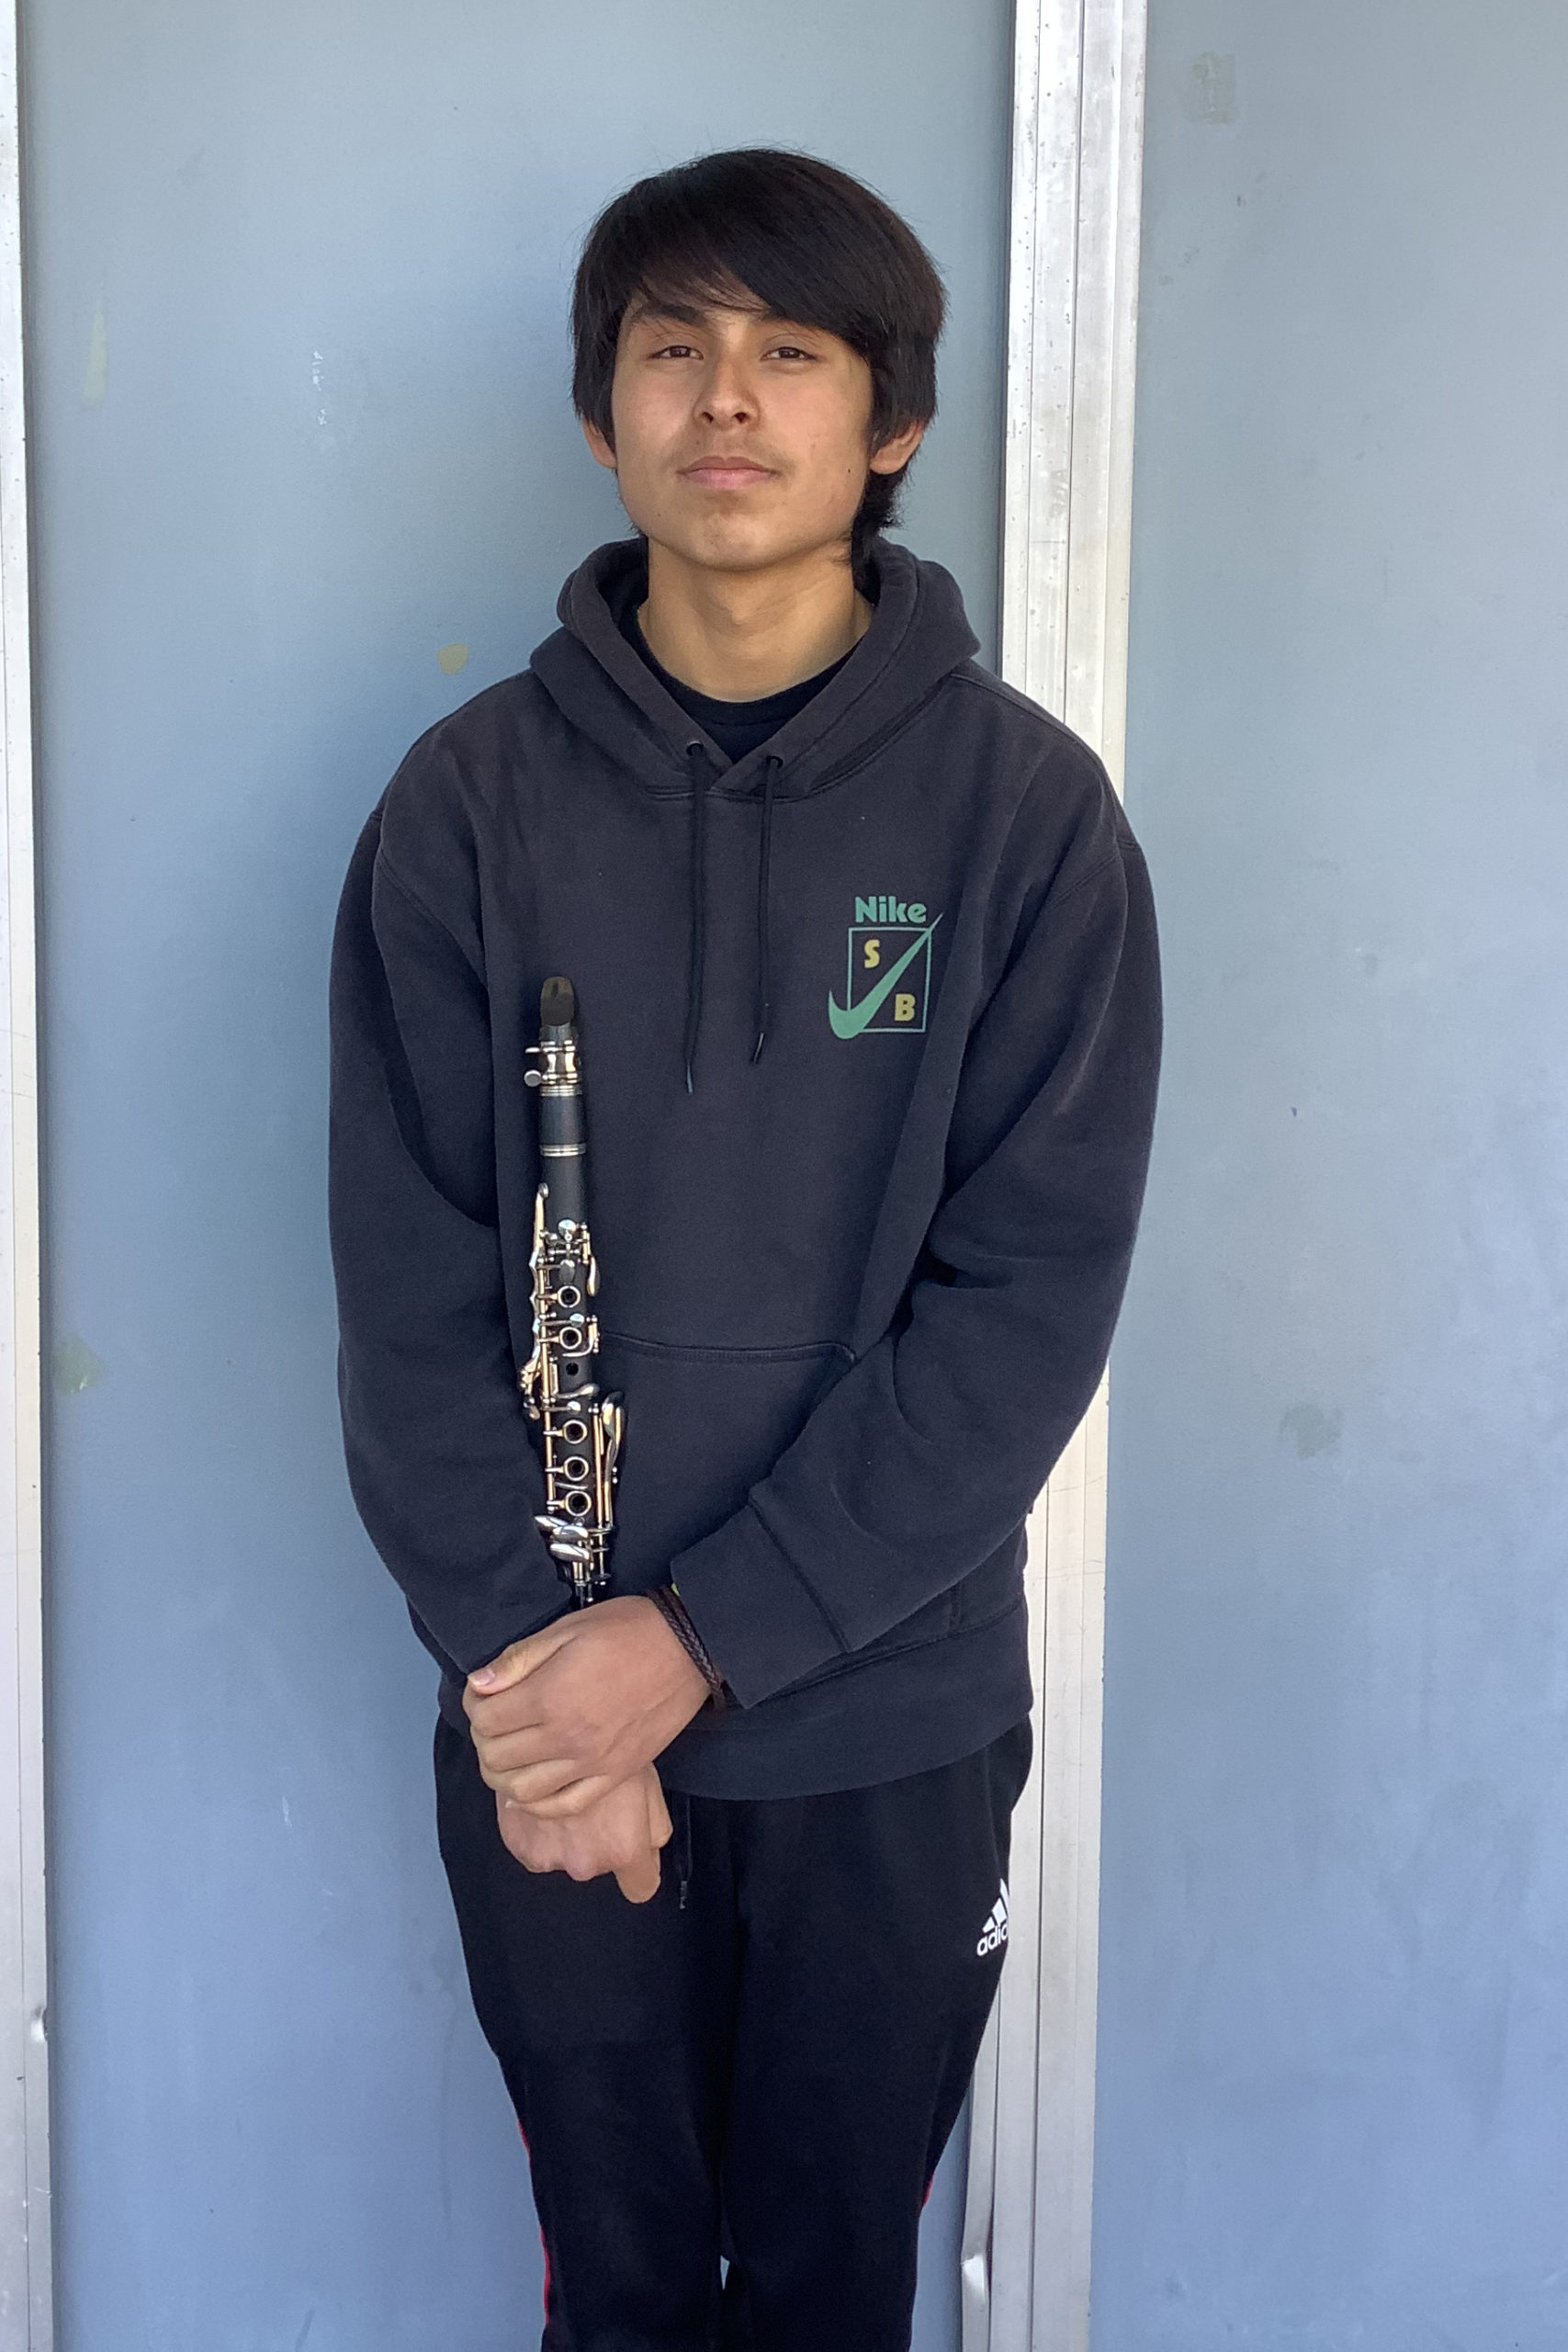 Sophomore Joseph Martinez shows his passion for music as he holds his clarinet.